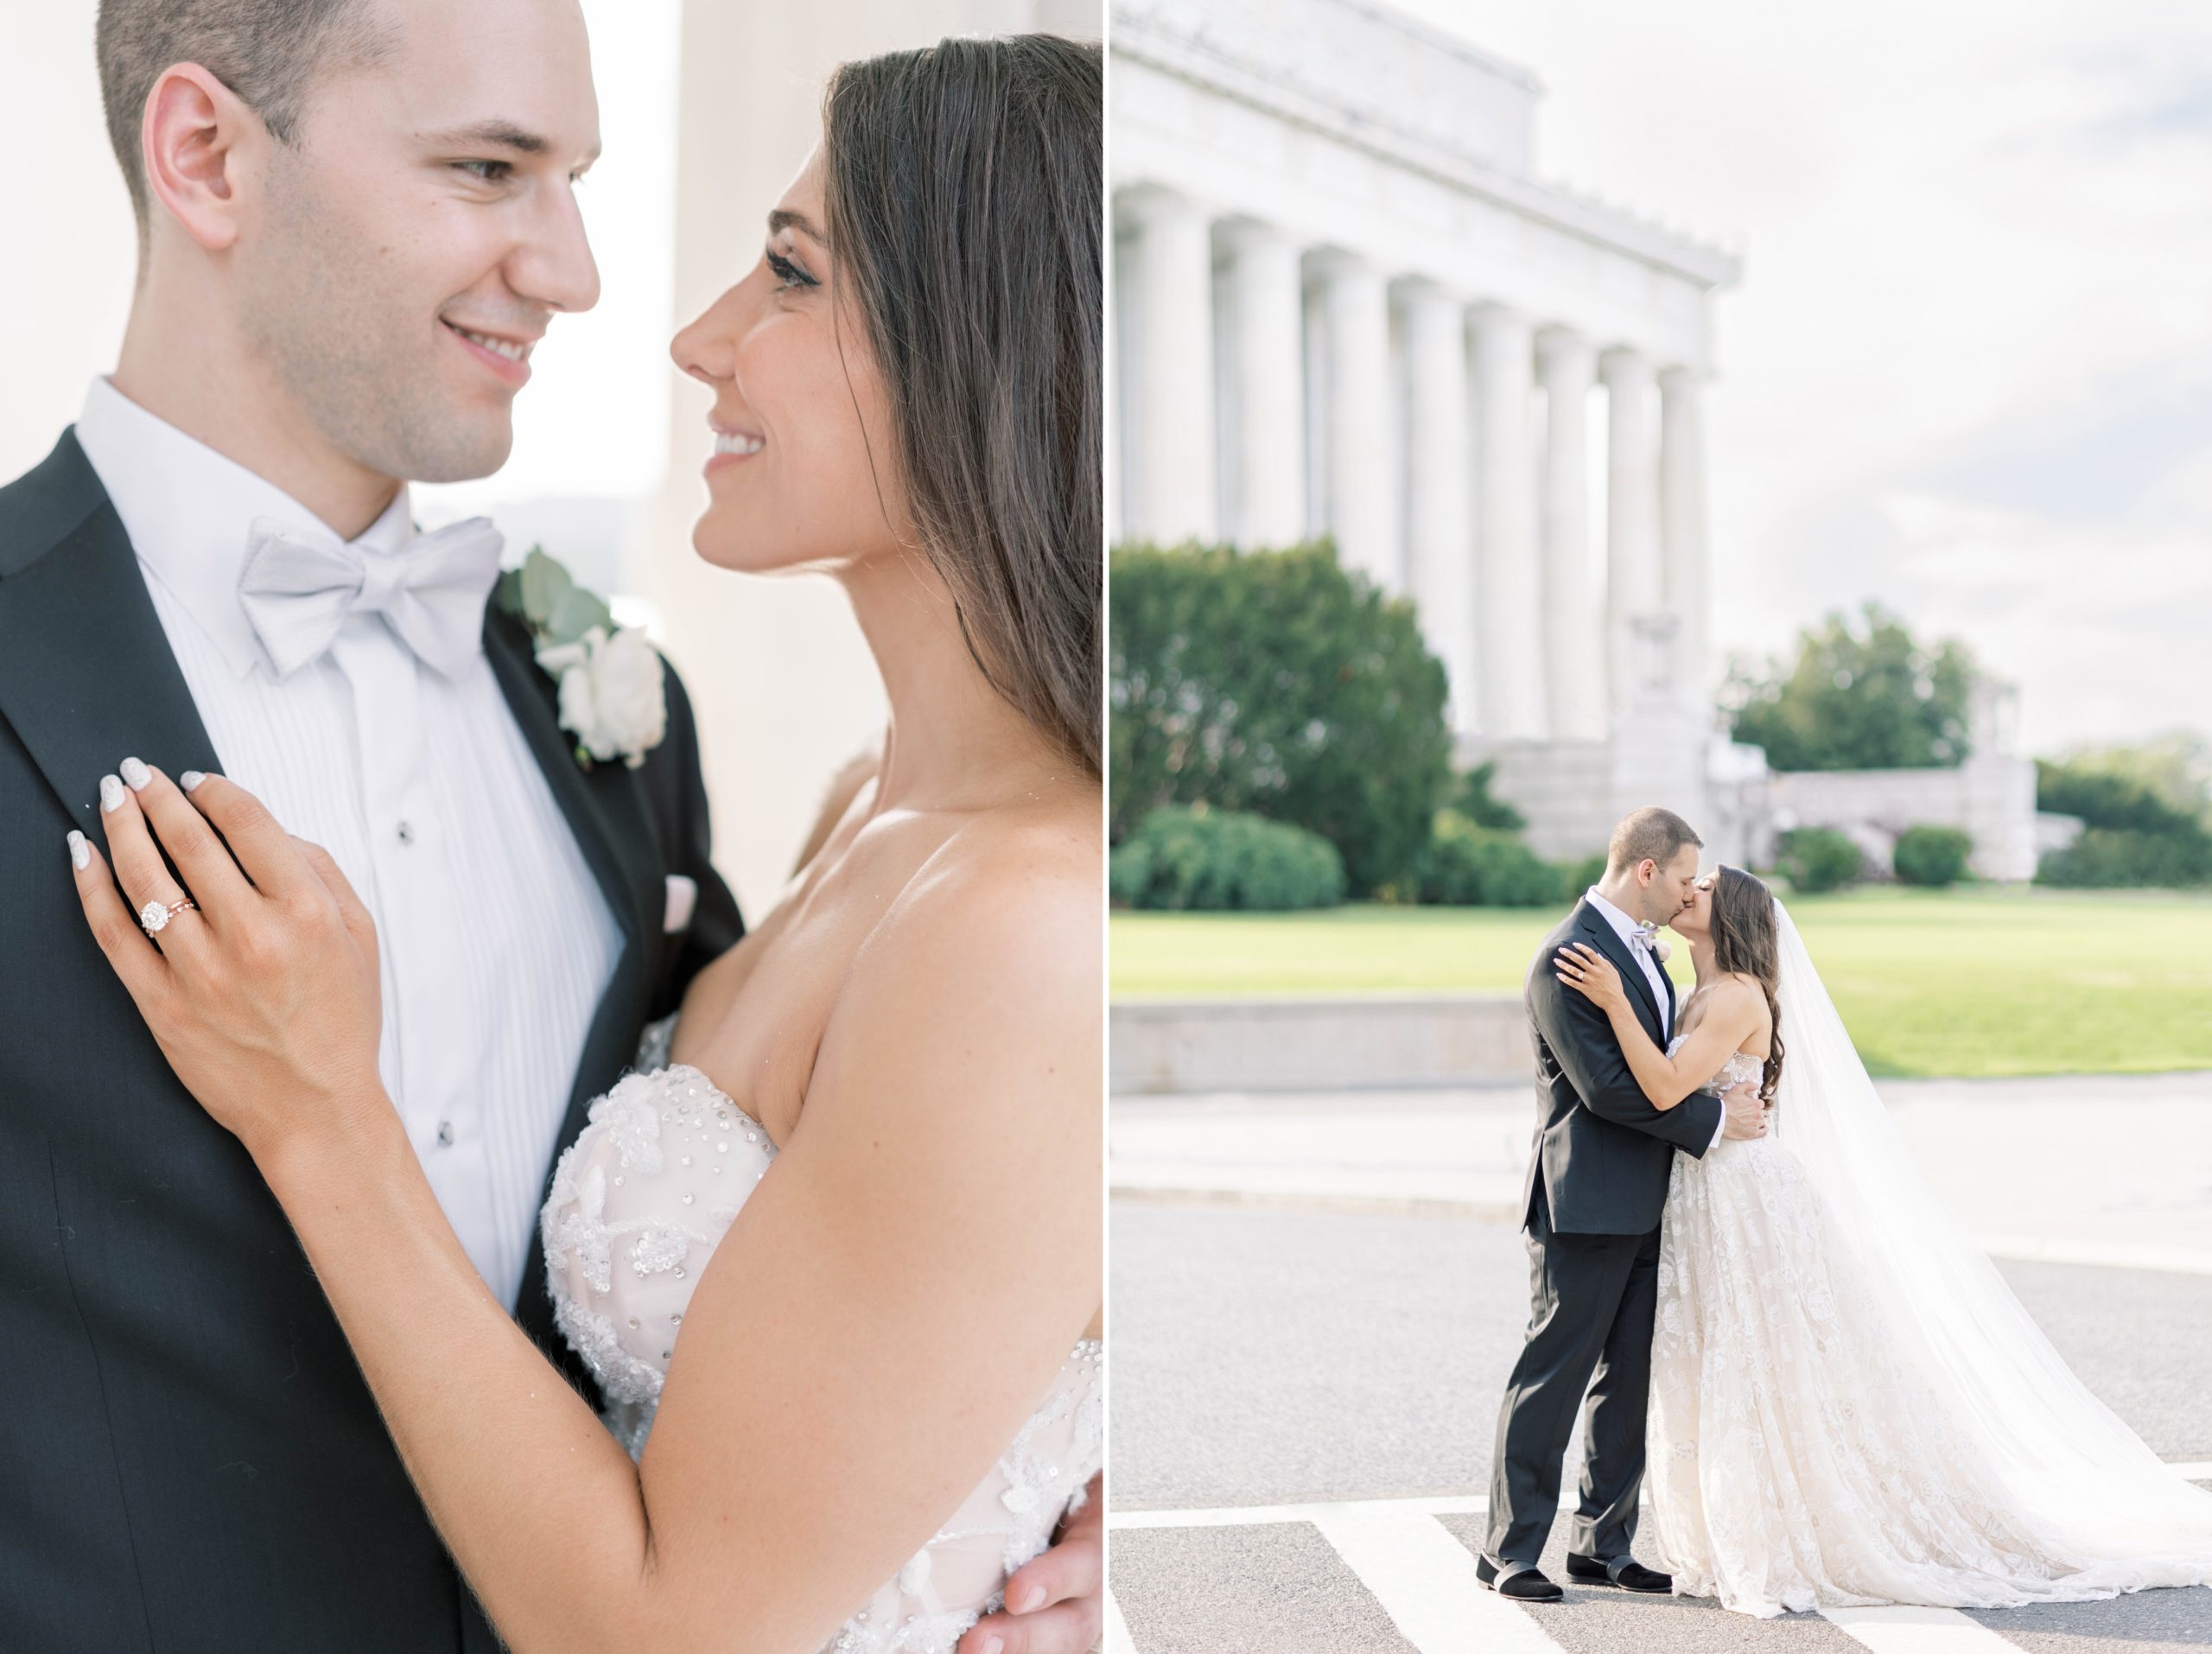 A stunning summer wedding at the Mayflower Hotel in Washington, DC with portraits at the iconic Lincoln Memorial.